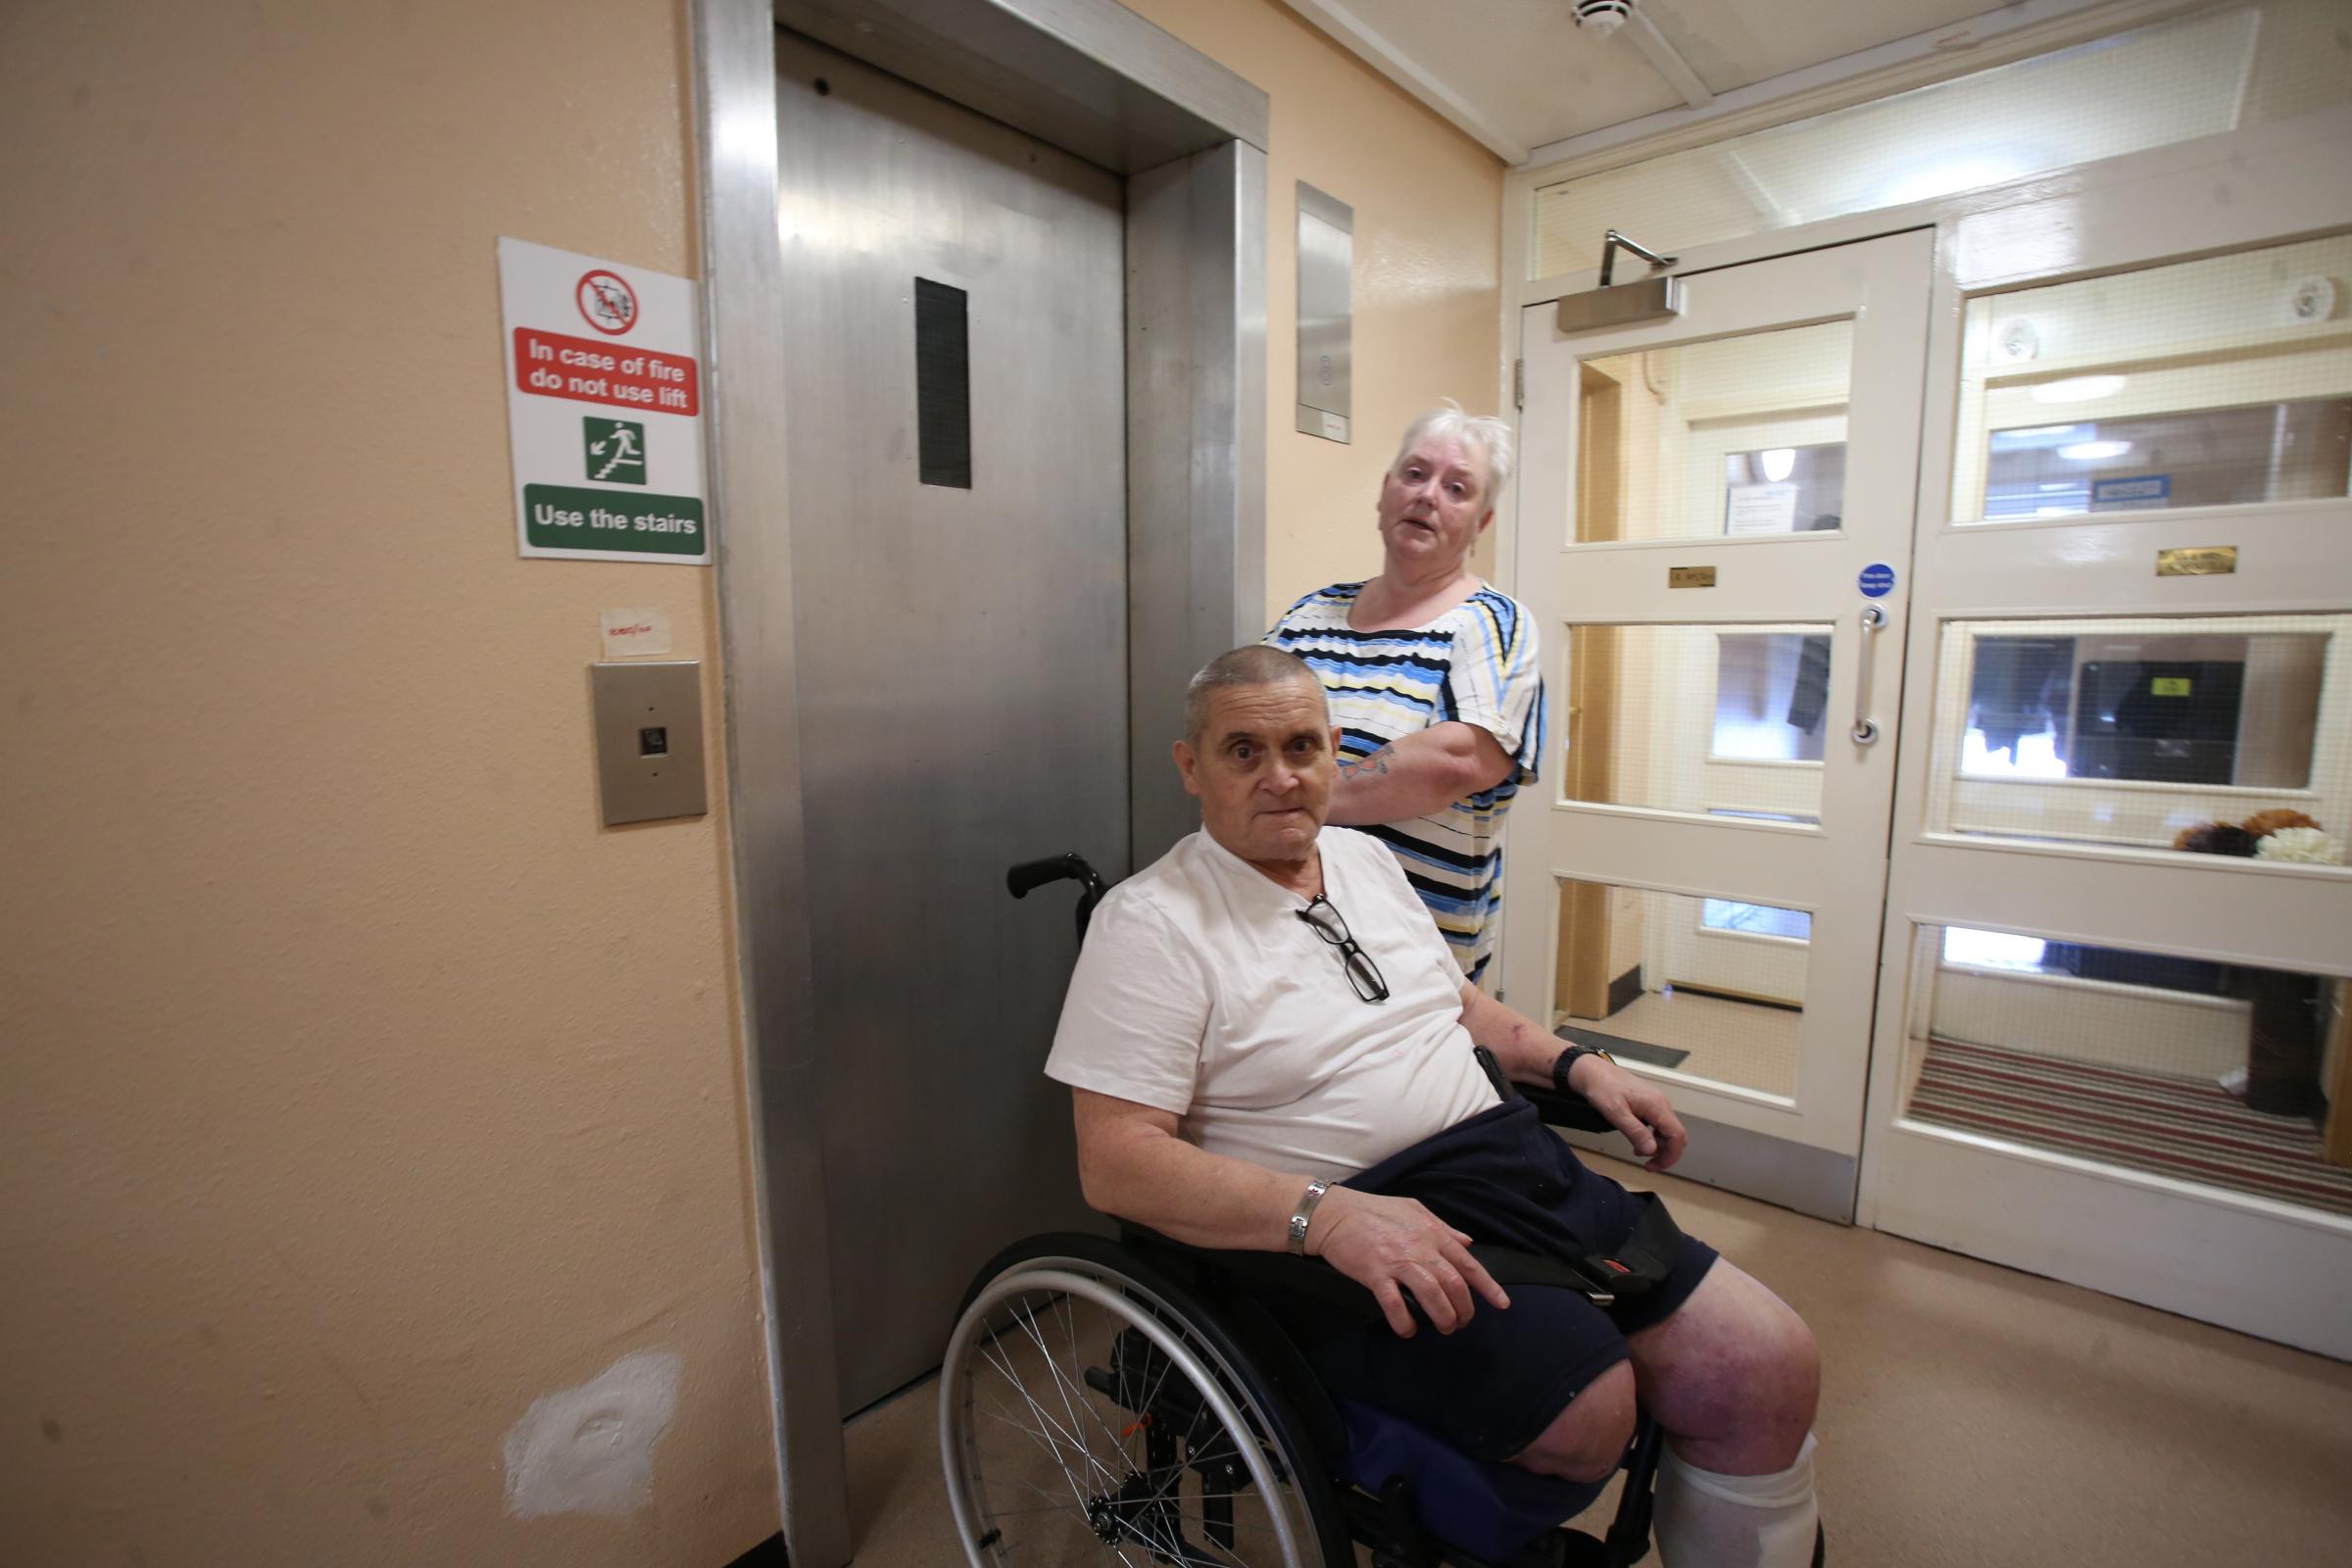 Disabled residents of Rowan Court trapped for 5 days